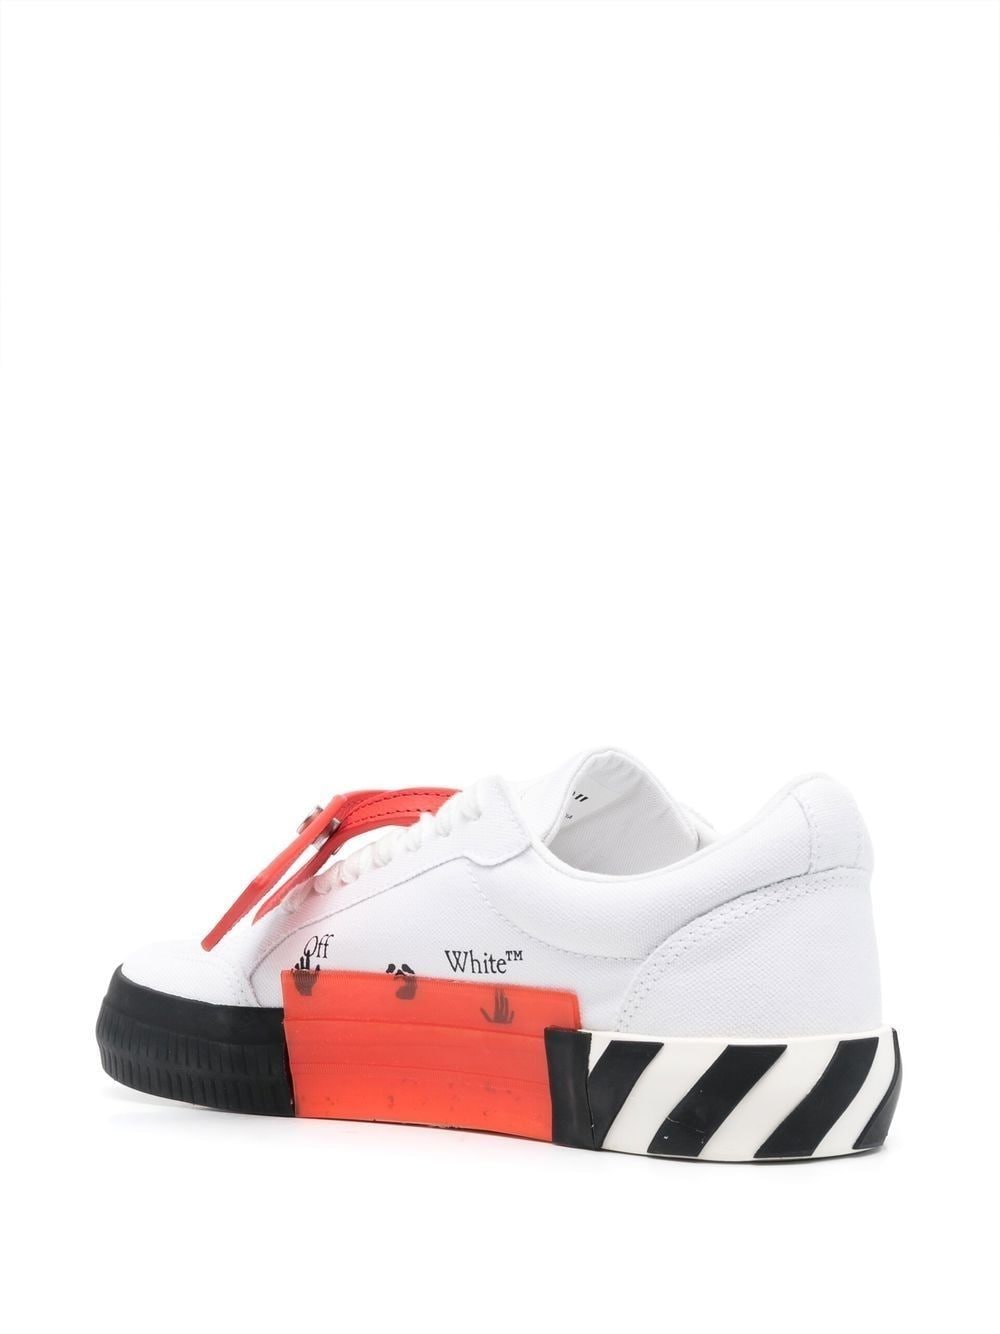 Off-White Vulcanized low-top Sneakers - Farfetch